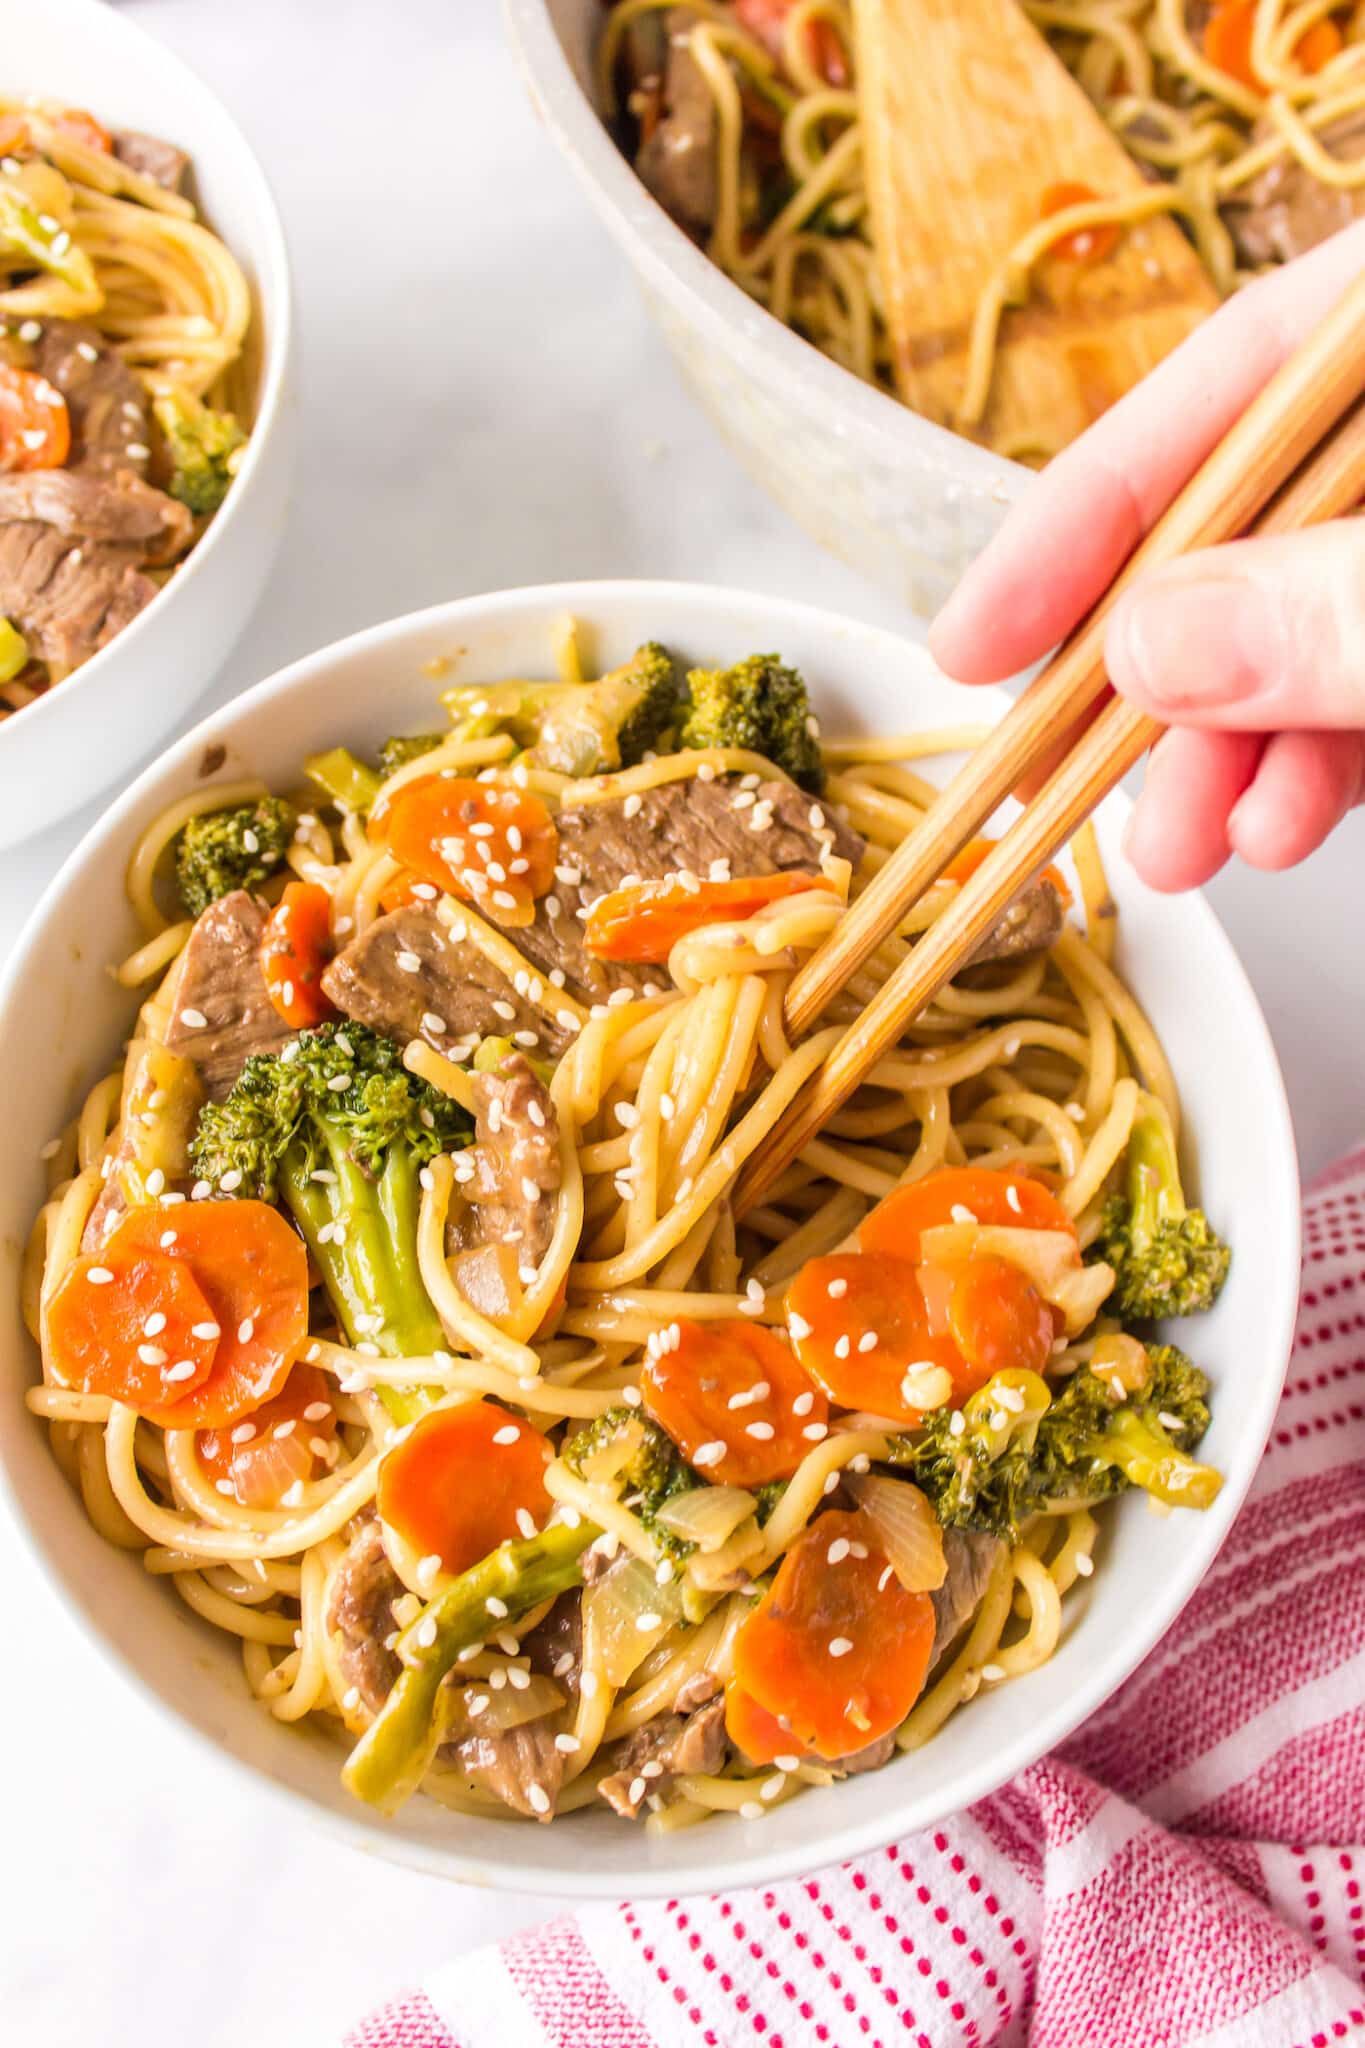 A hand holding a pair of chopsticks over a bowl of teriyaki beef noodles.